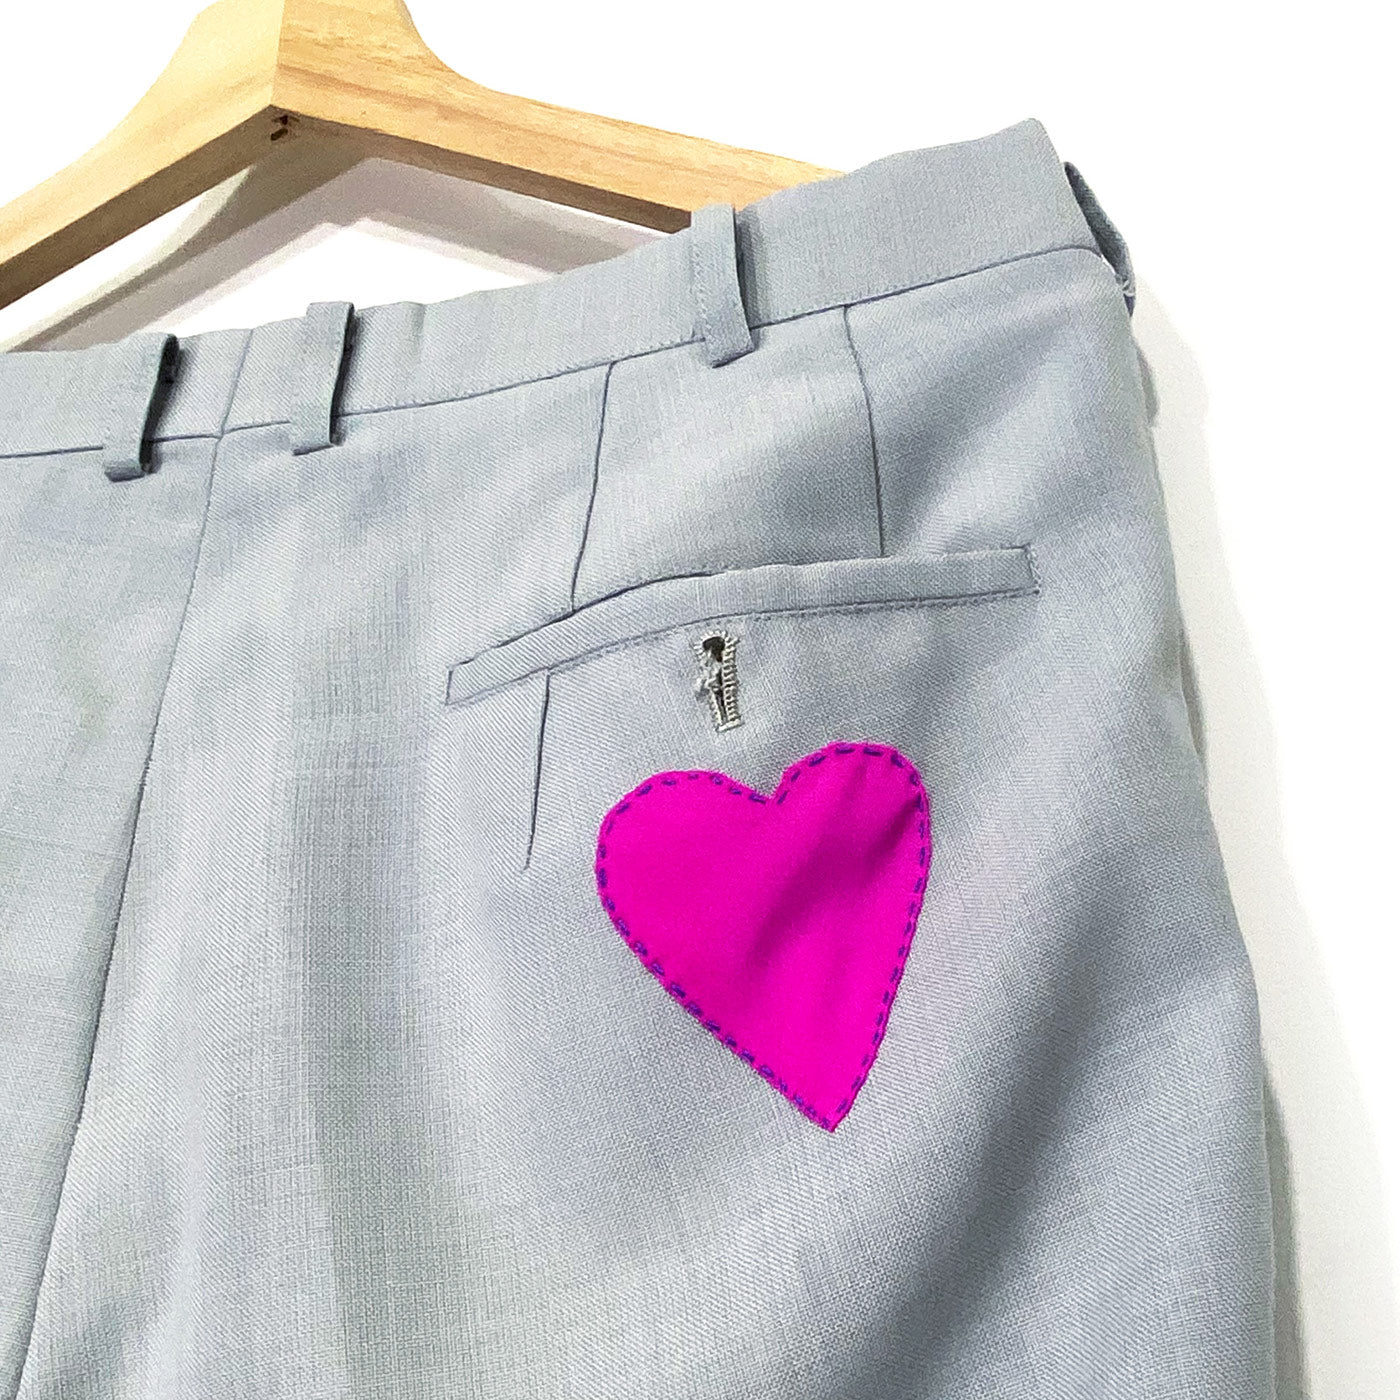 The back of grey trousers with a pink heart hand stitched on the pocket